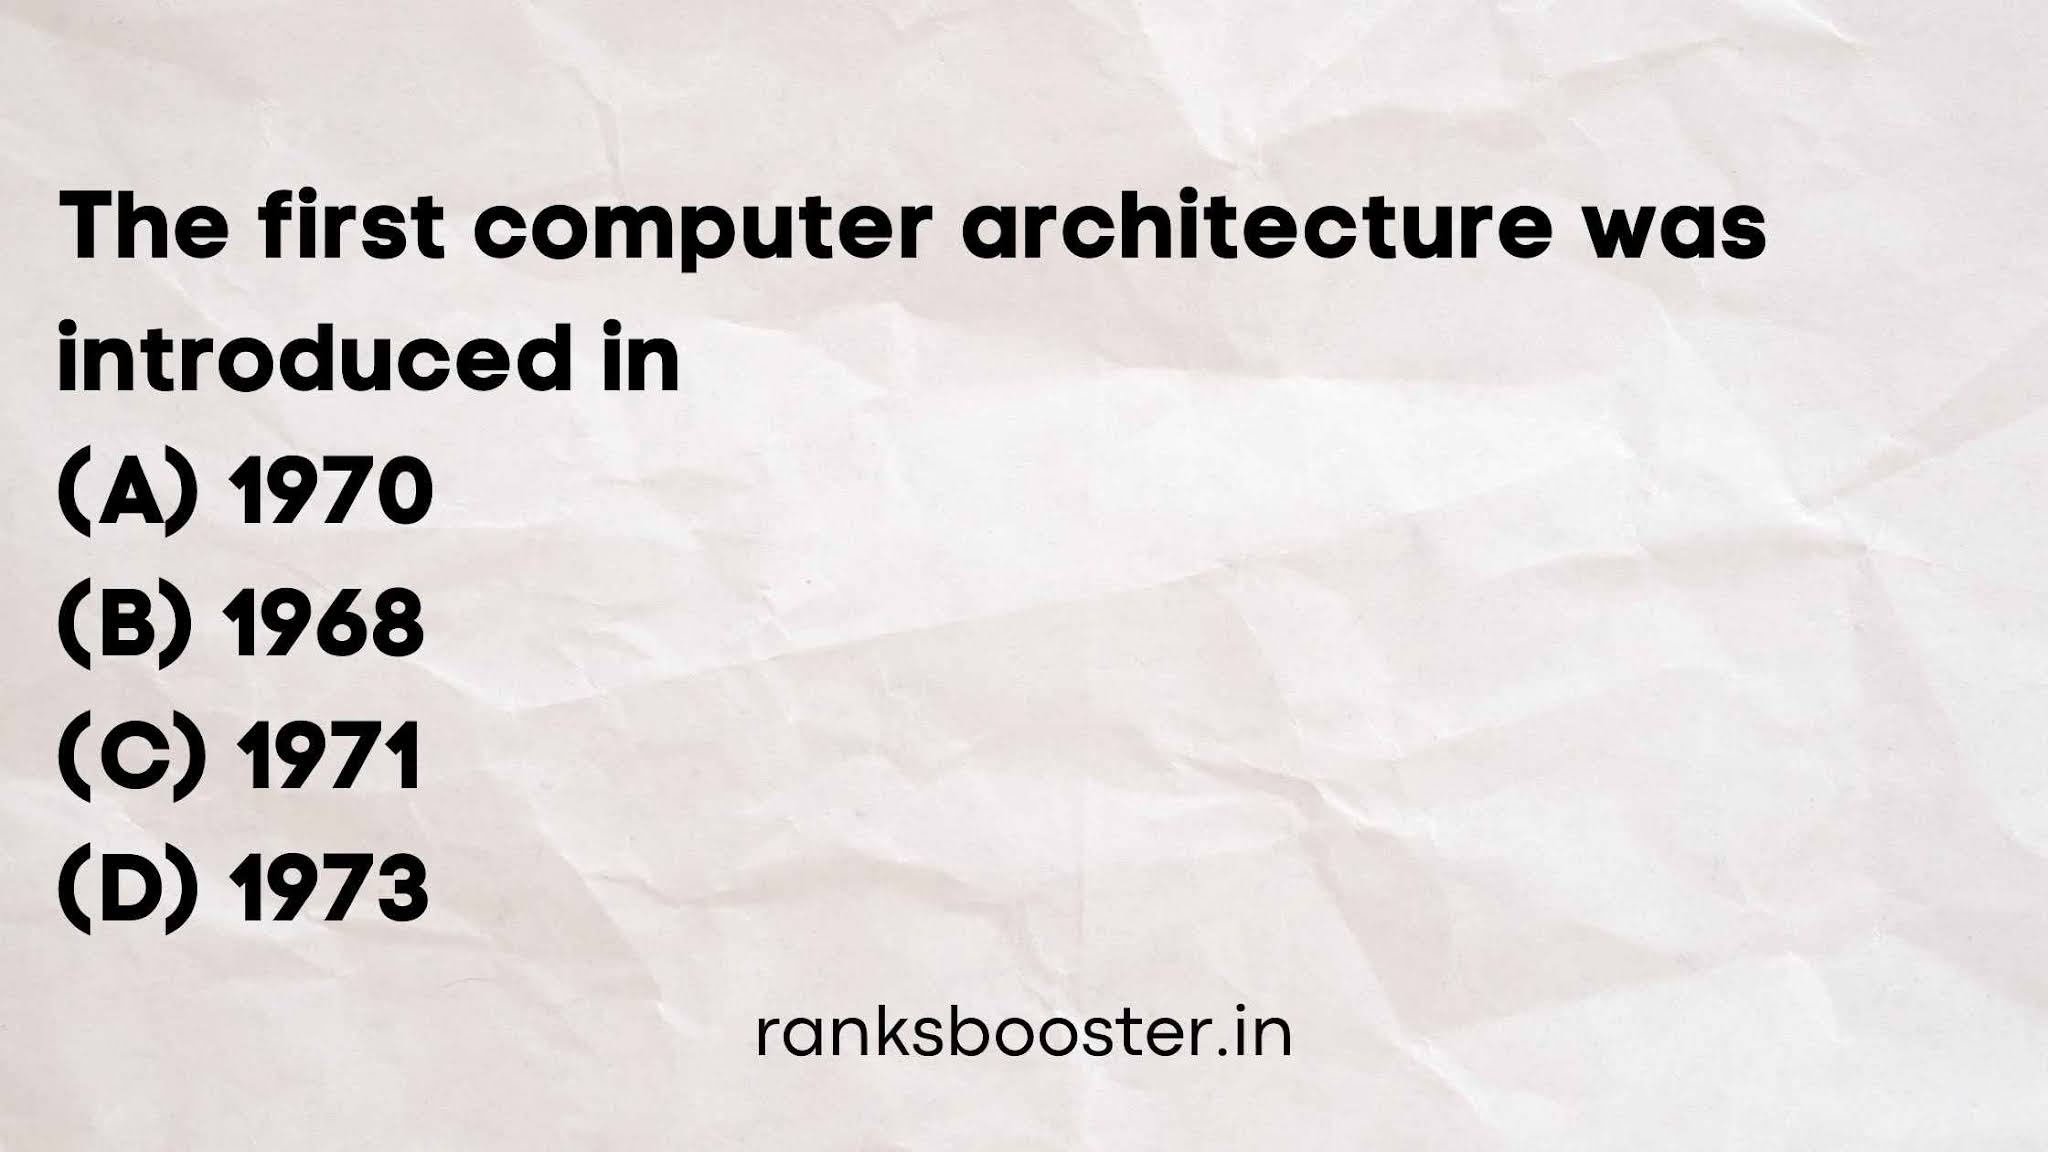 The first computer architecture was introduced in (A) 1970 (B) 1968 (C) 1971 (D) 1973